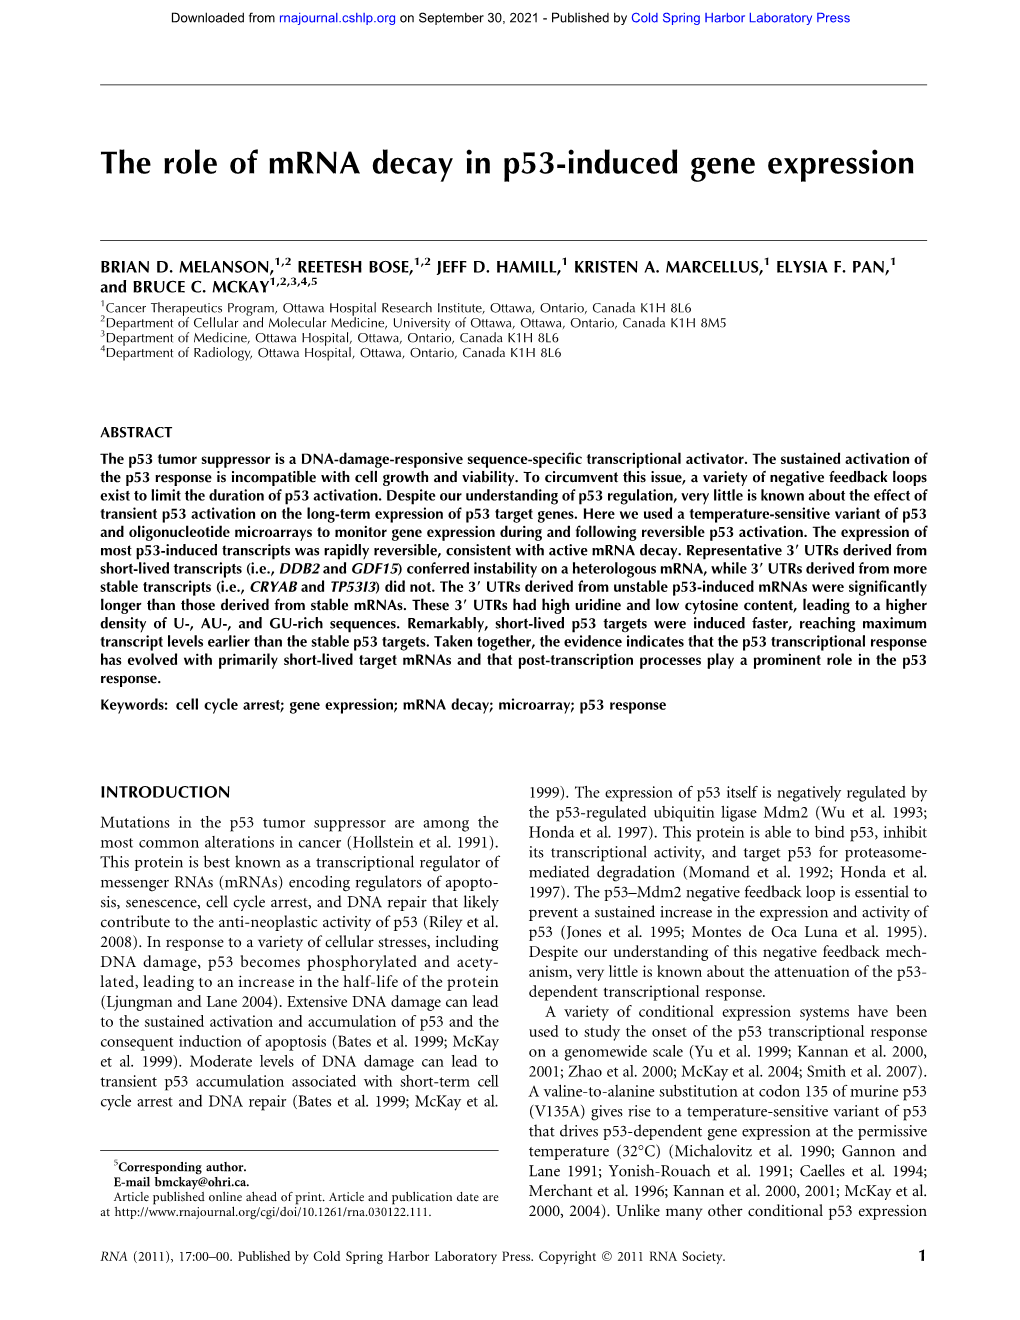 The Role of Mrna Decay in P53-Induced Gene Expression